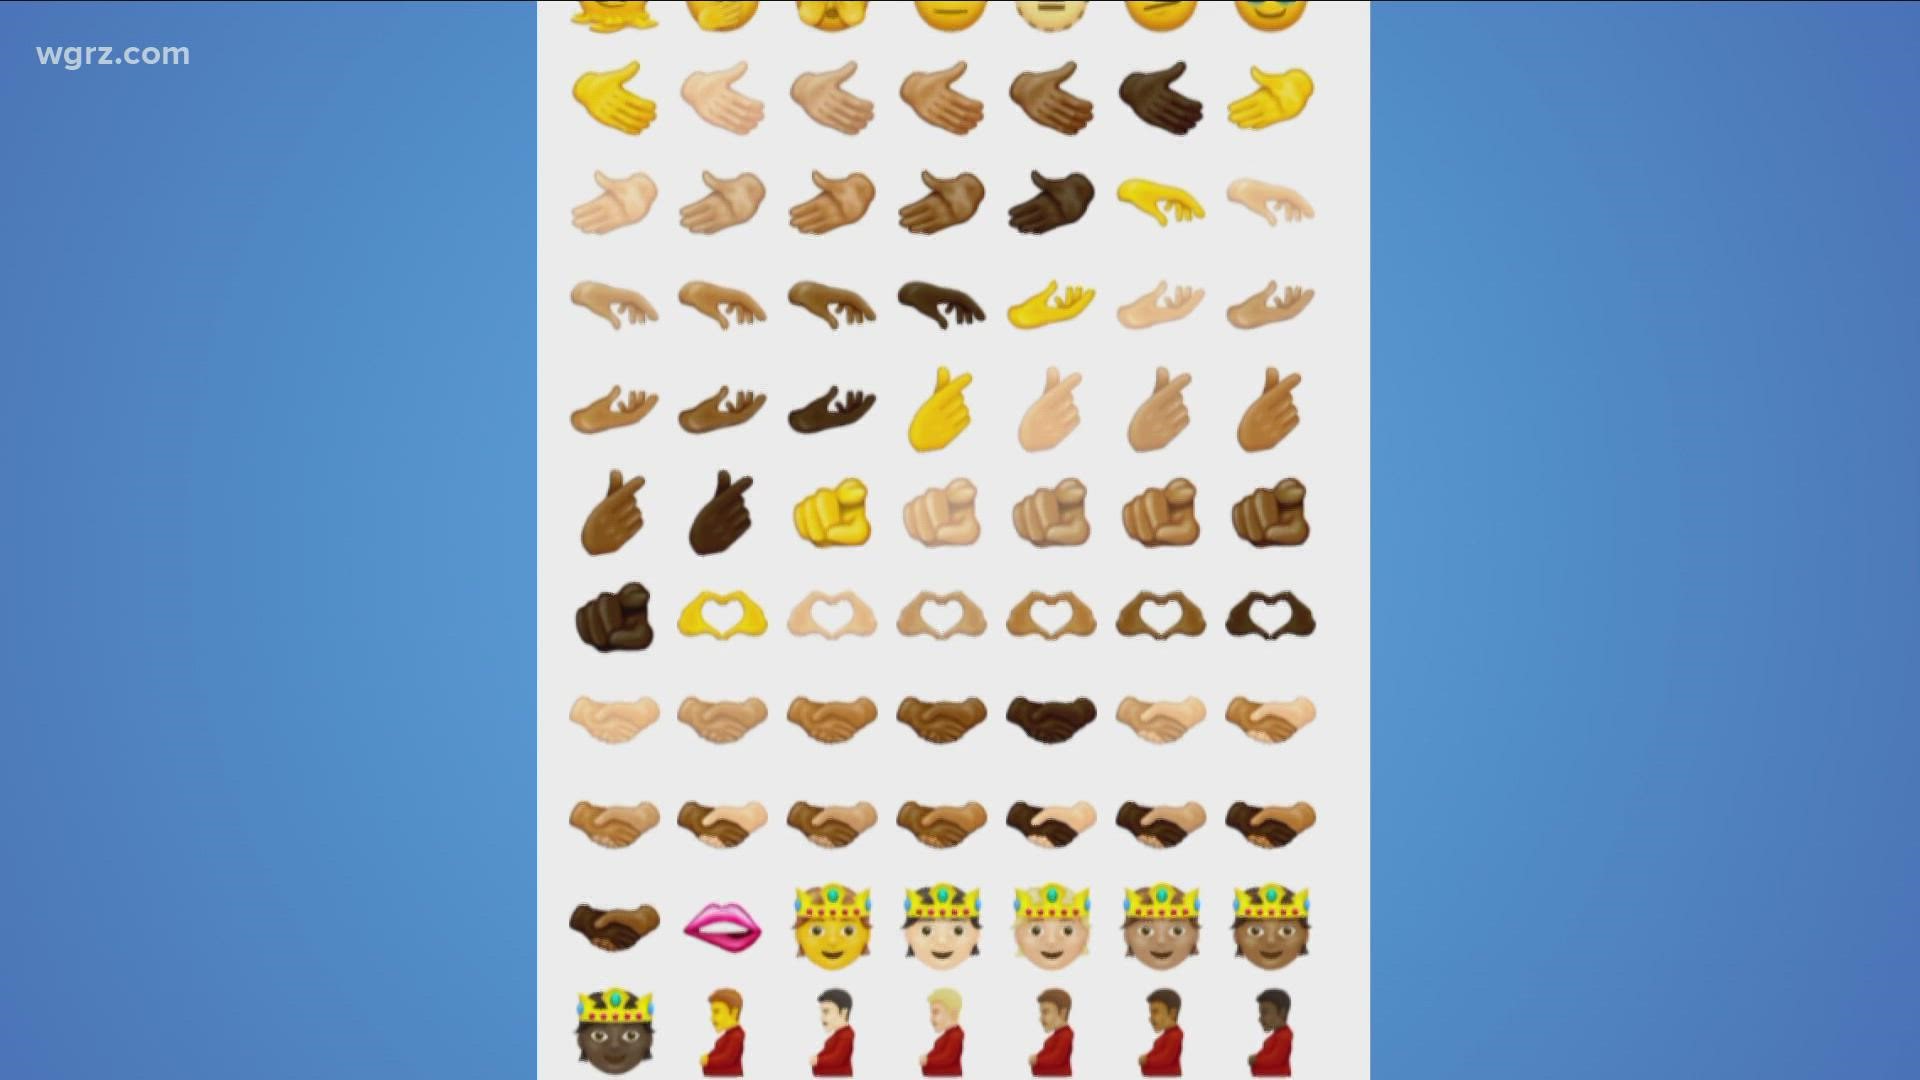 There are more than 70 new emojis coming soon to the iPhone.